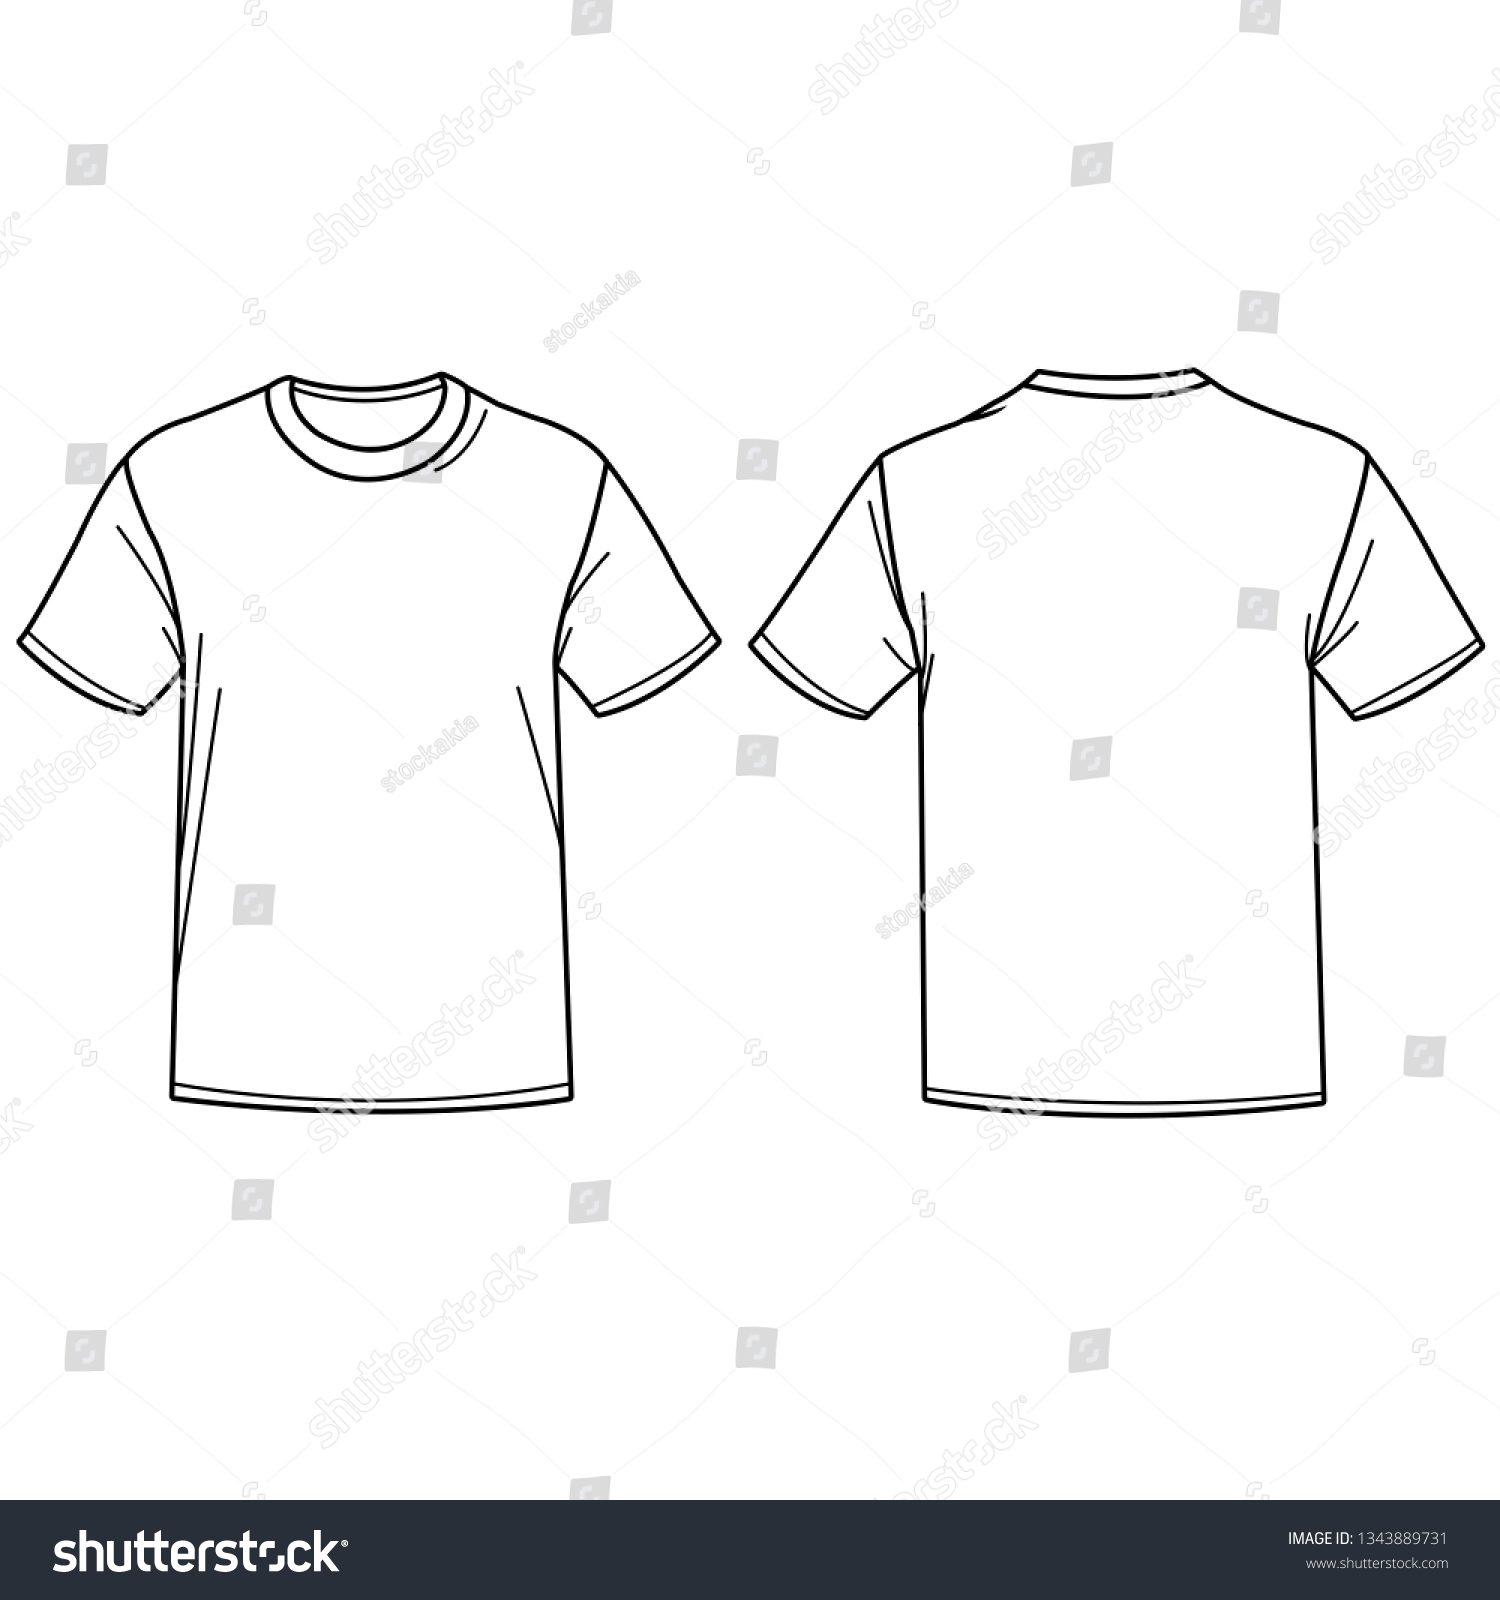 Front Back View T Shirts Vector Stock Vector (Royalty Free) 1343889731 ...